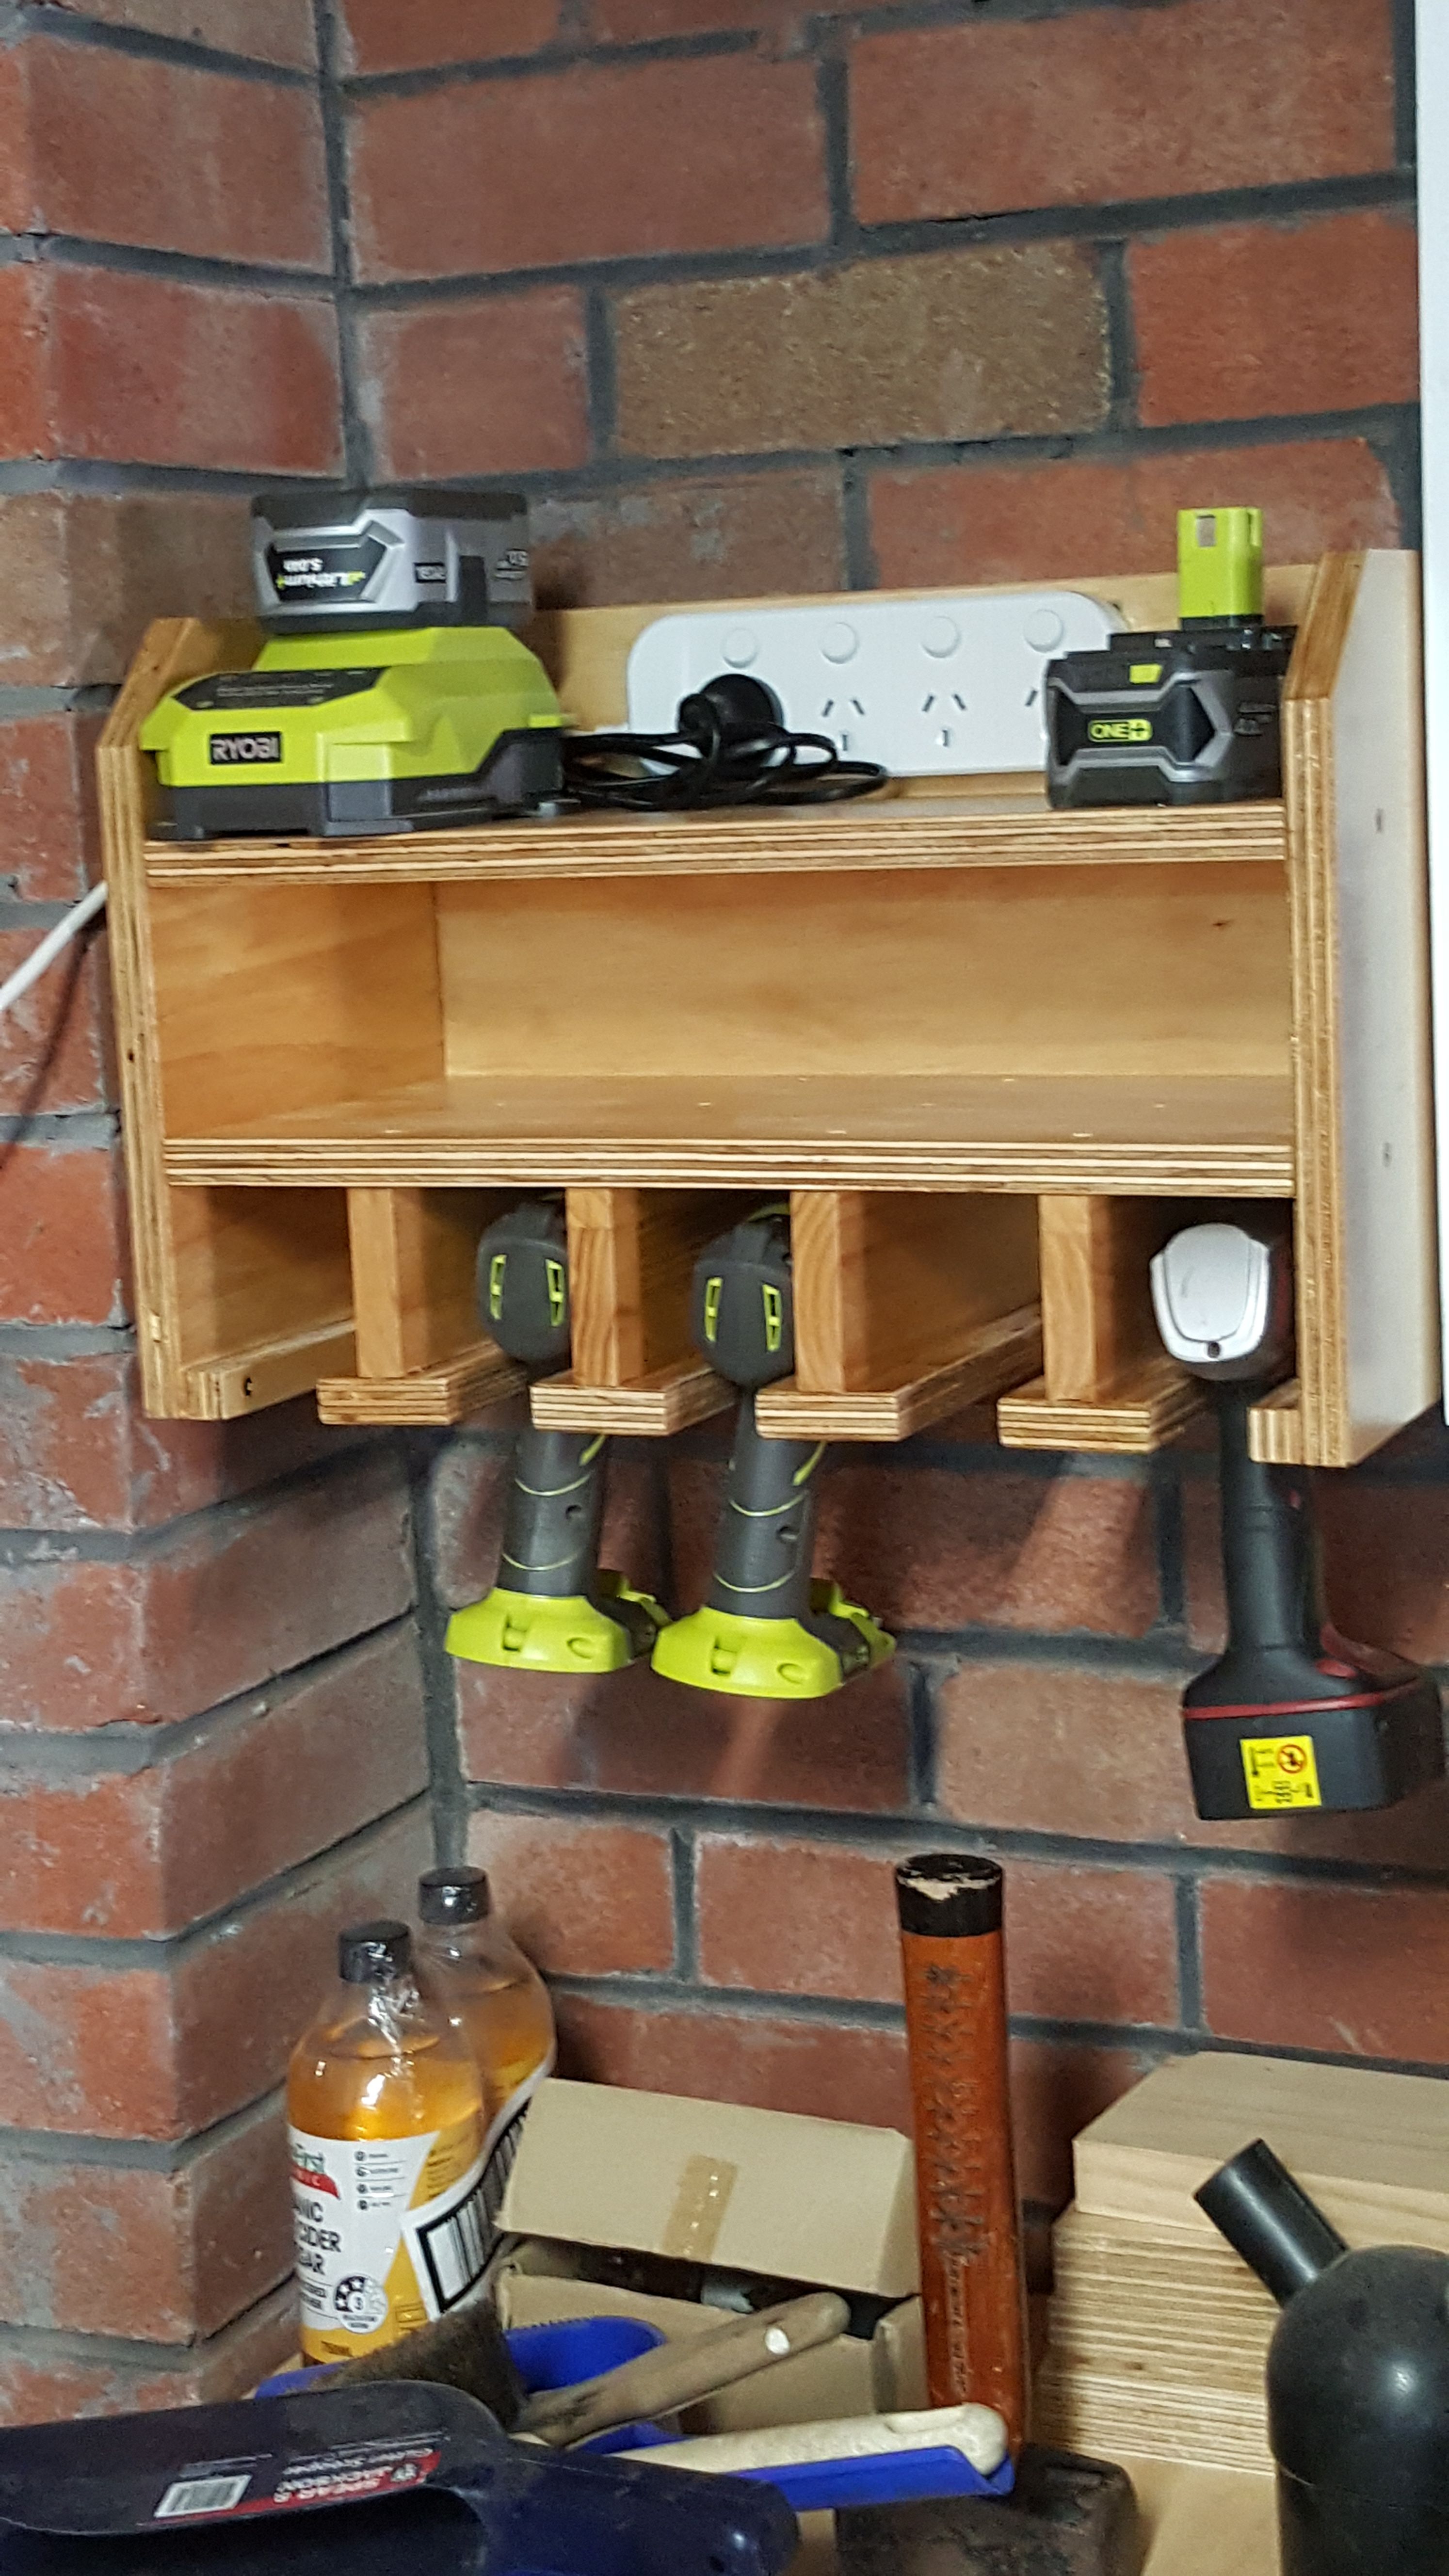 Cordless drill storage charging station | Bunnings Workshop community